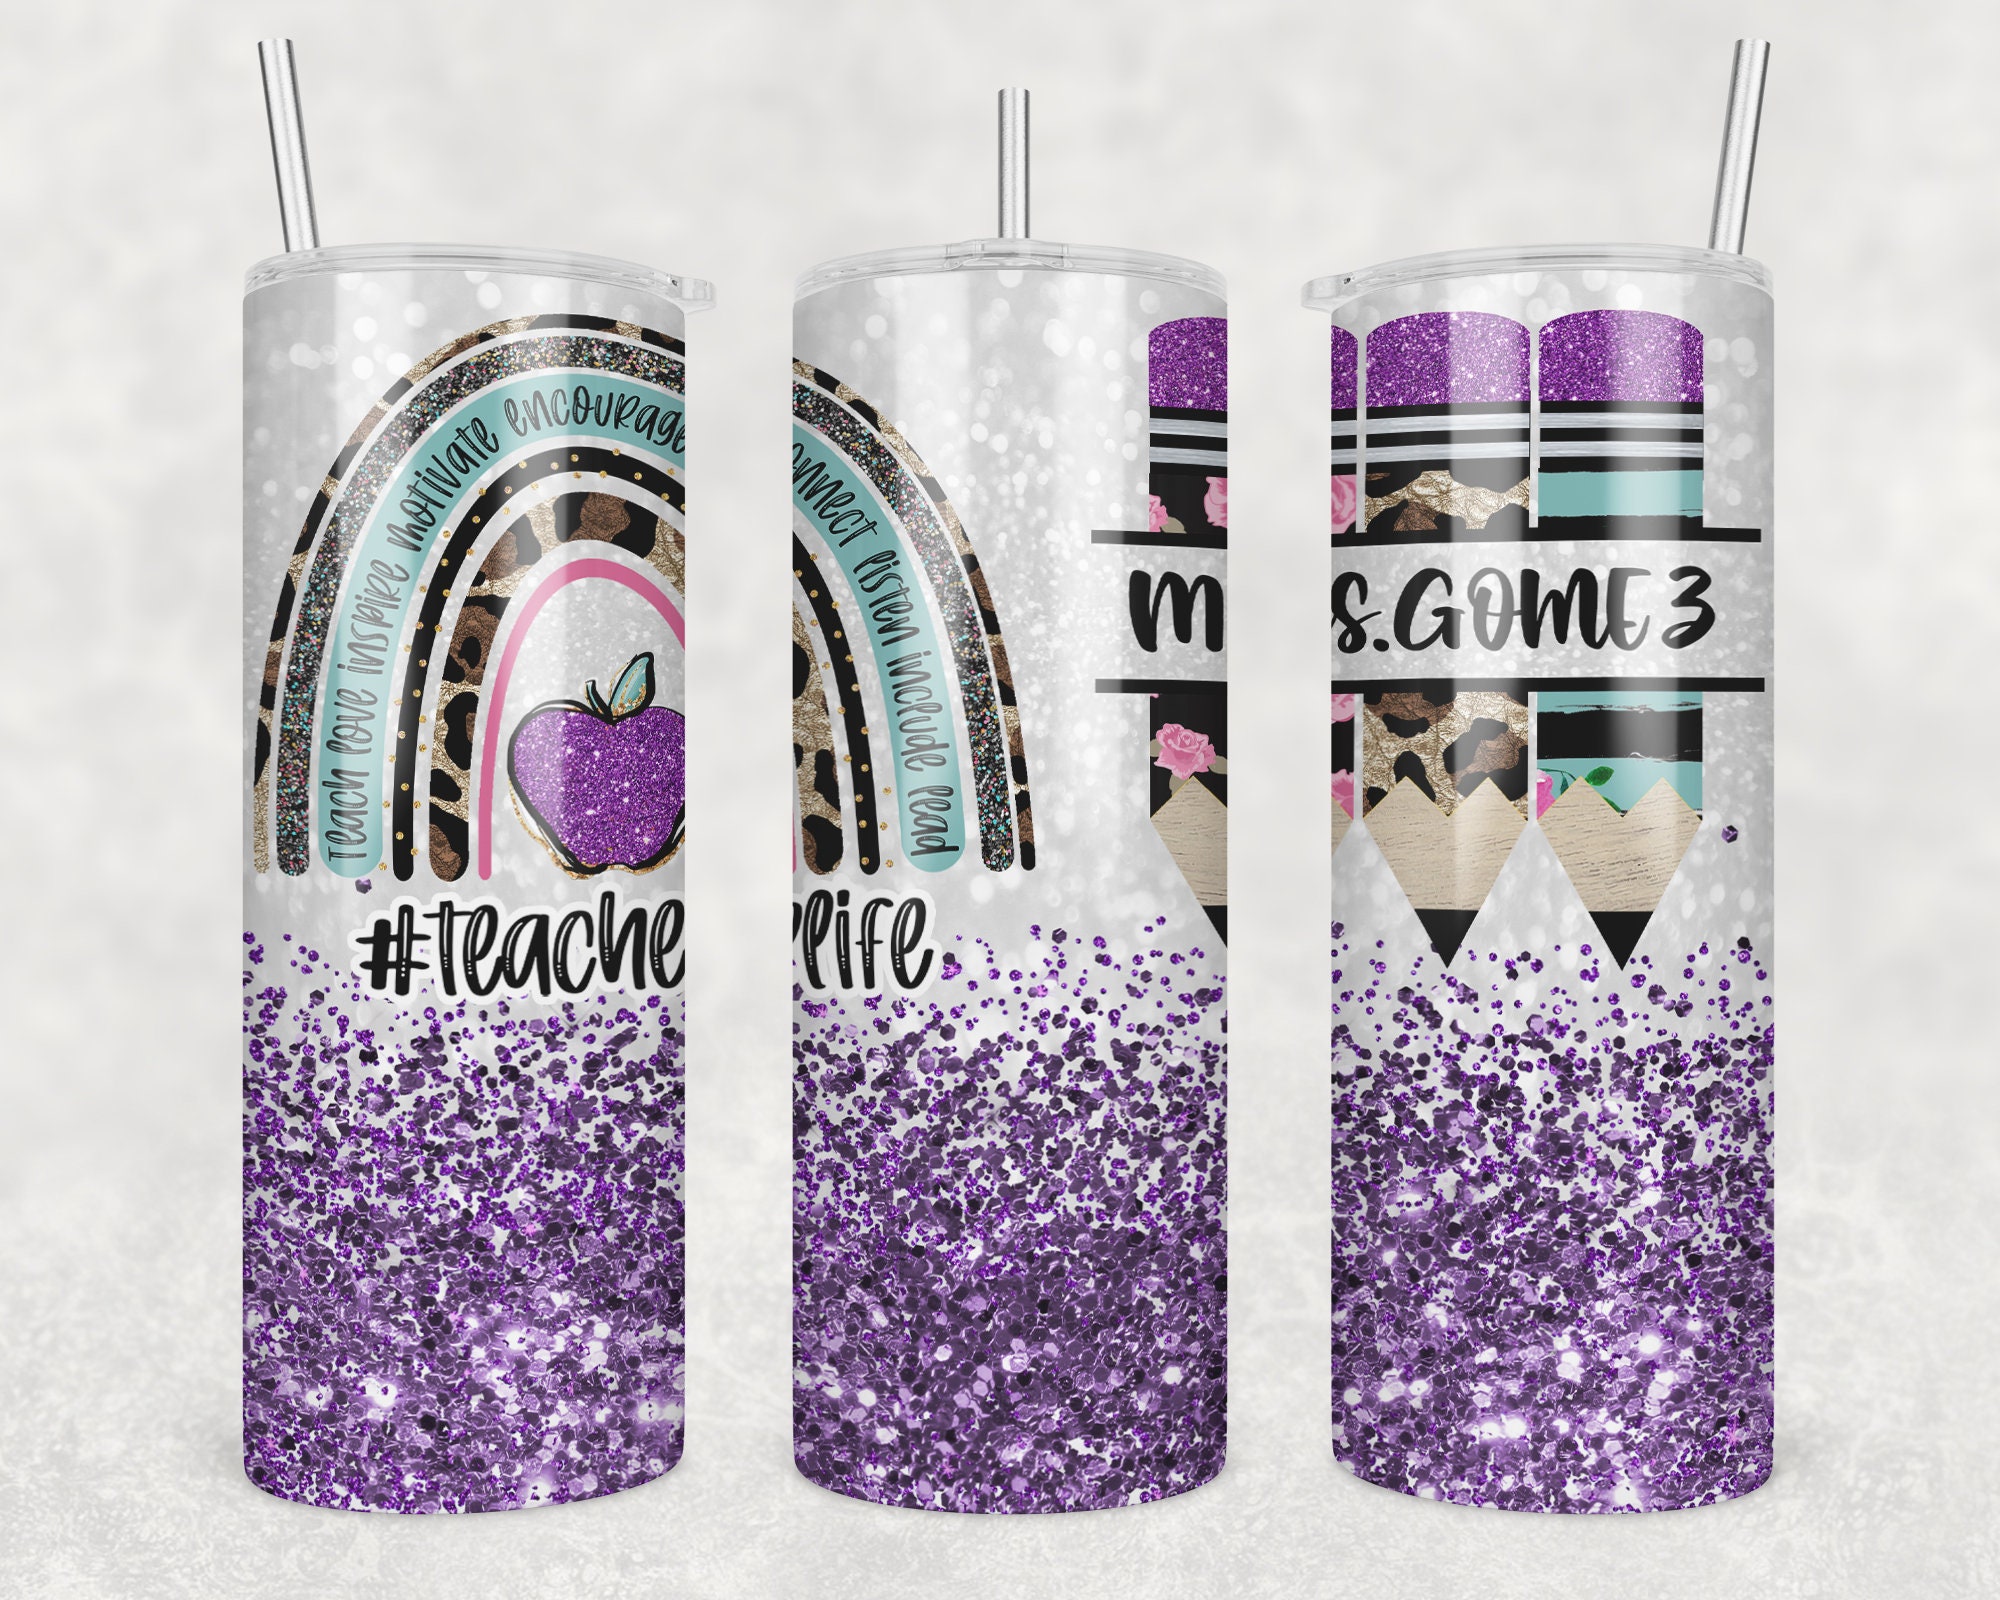 NEW Amethyst Purple Glitter Tumbler Cup With Shiny Gem Cut Dome Lid & Straw